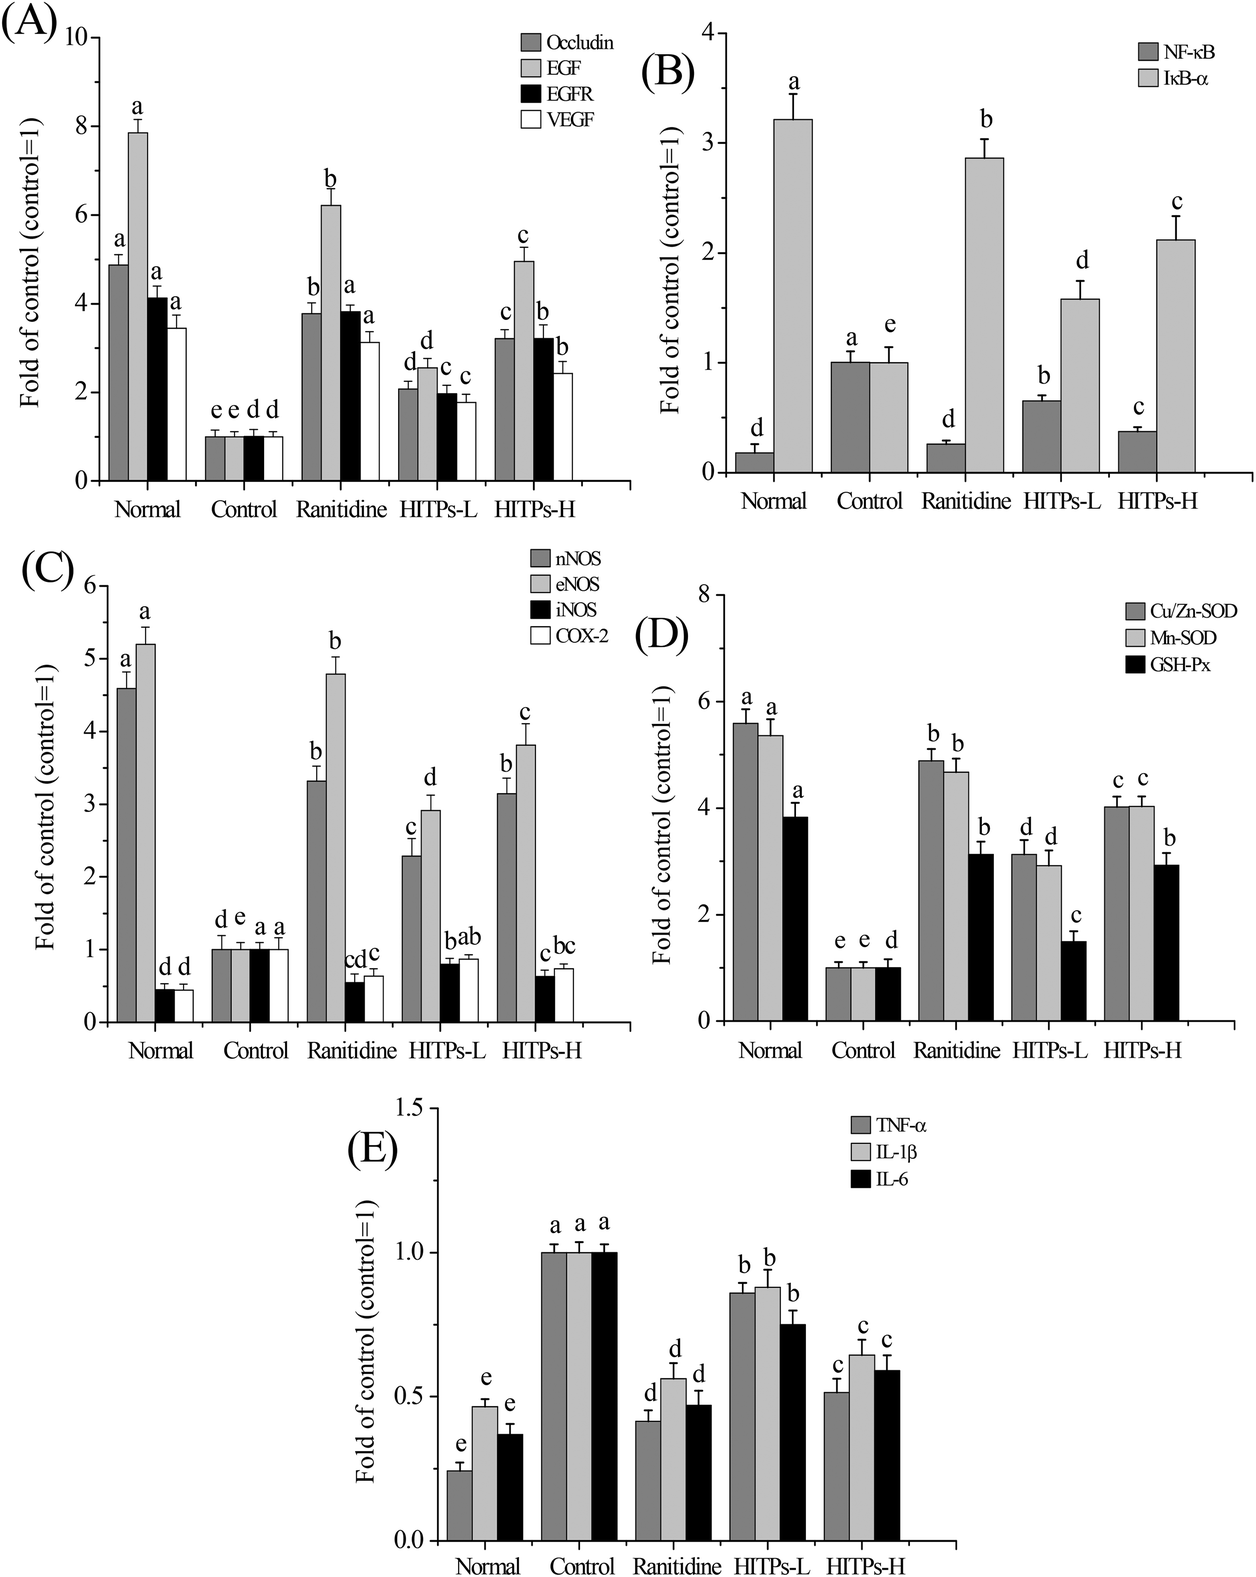 Hunan Insect Tea Polyphenols Provide Protection Against Gastric Injury Induced By Hcl Ethanol Through An Antioxidant Mechanism In Mice Food Function Rsc Publishing